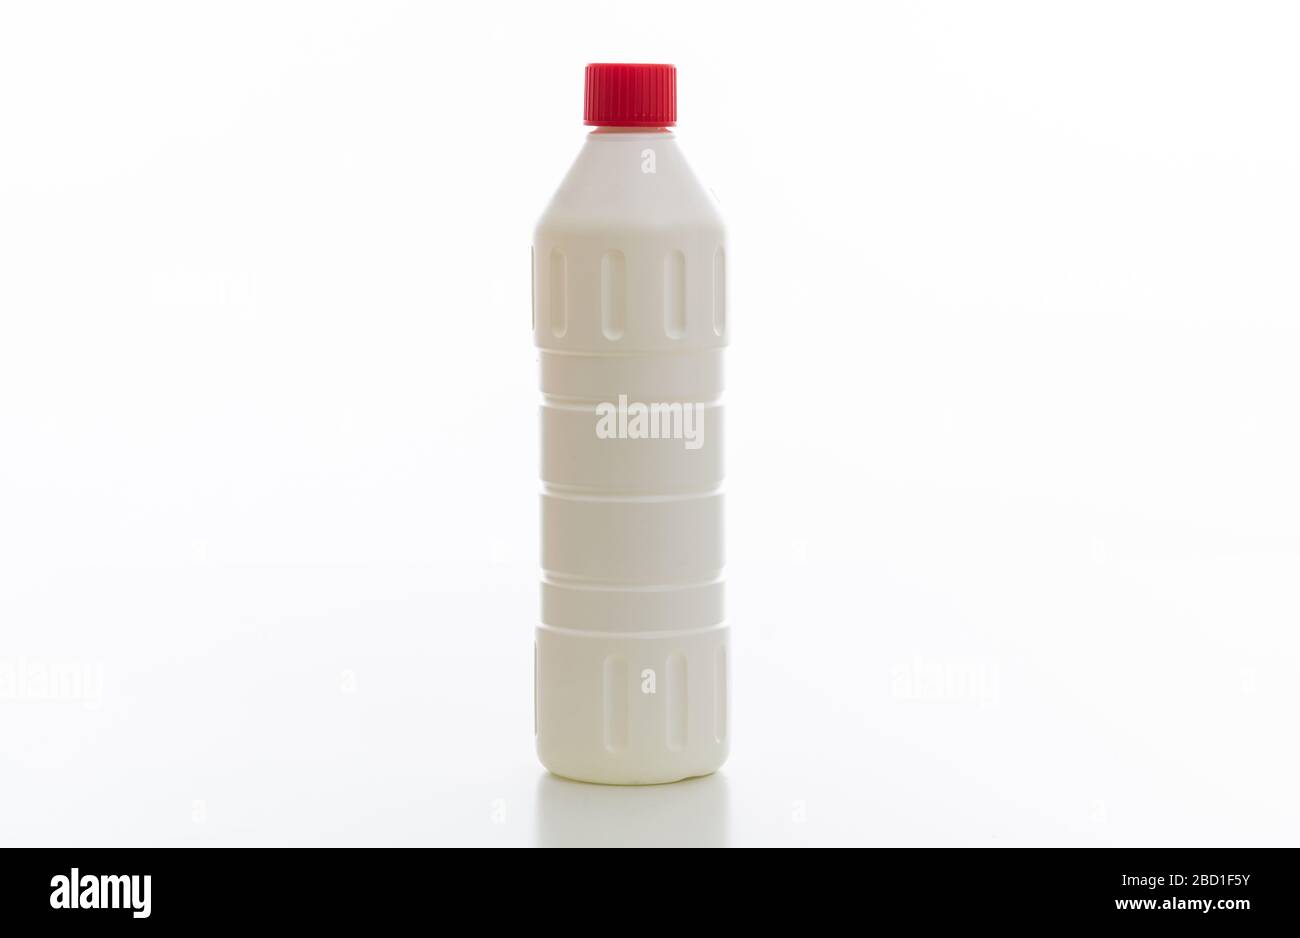 Cleaning chlorine bleach bottle with red cap isolated against white background. Chemical household product for laundry and disinfection, no name templ Stock Photo